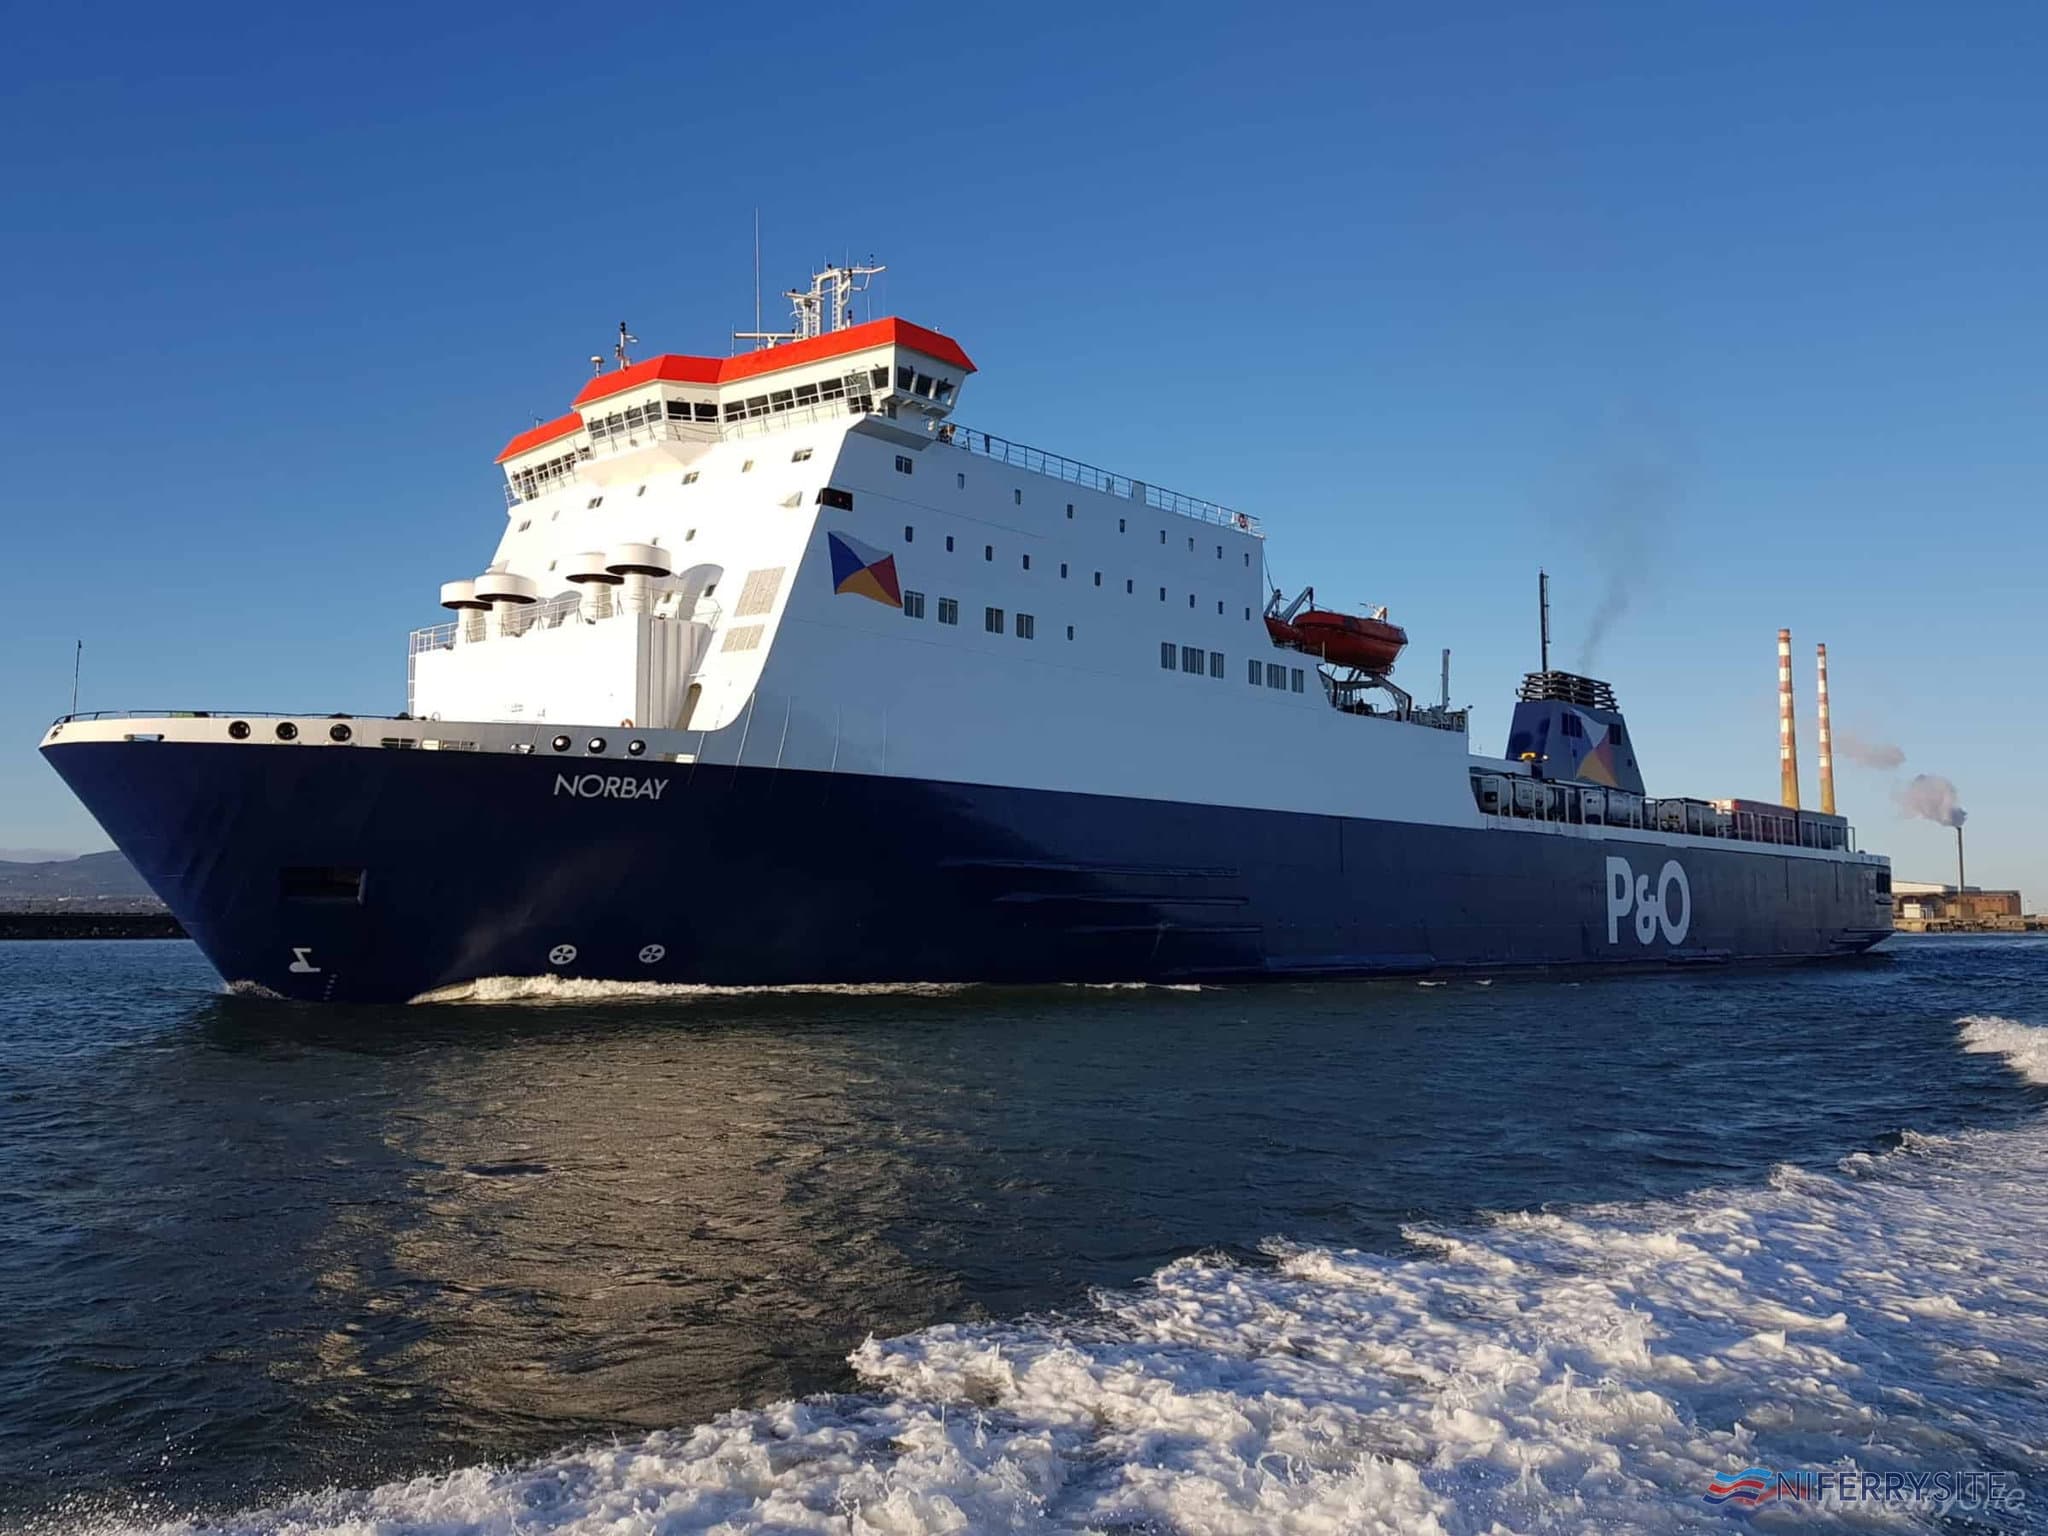 P&O Ferries NORBAY leaves Dublin for Liverpool on her first sailing following a three-week absence for dry docking in Poland, 24.03.19. Copyright © Robbie Cox.